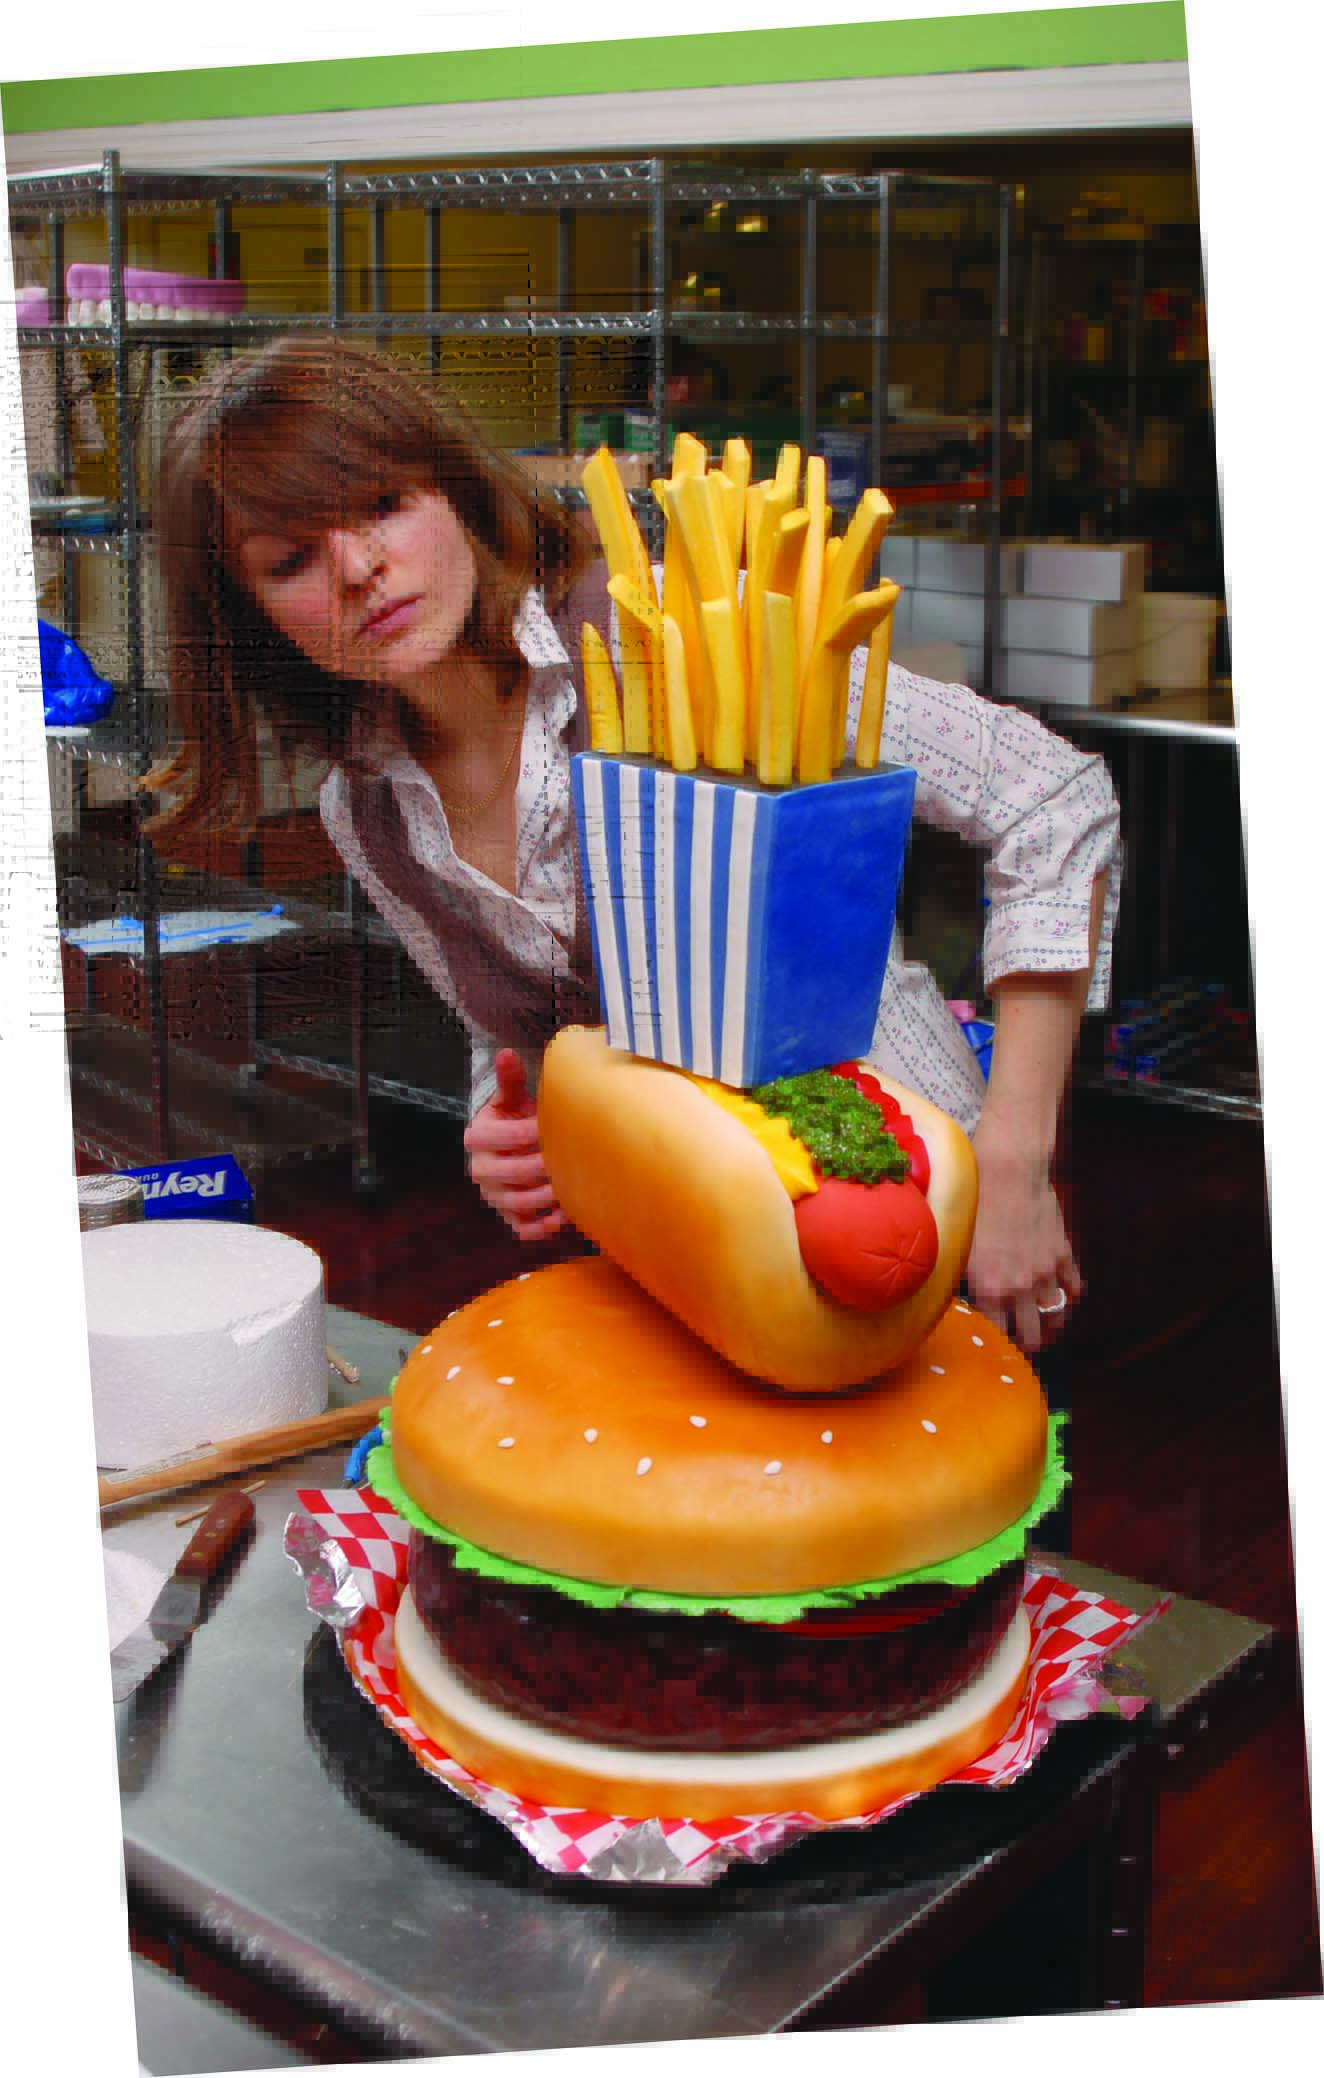 Woman observing model of fast food items